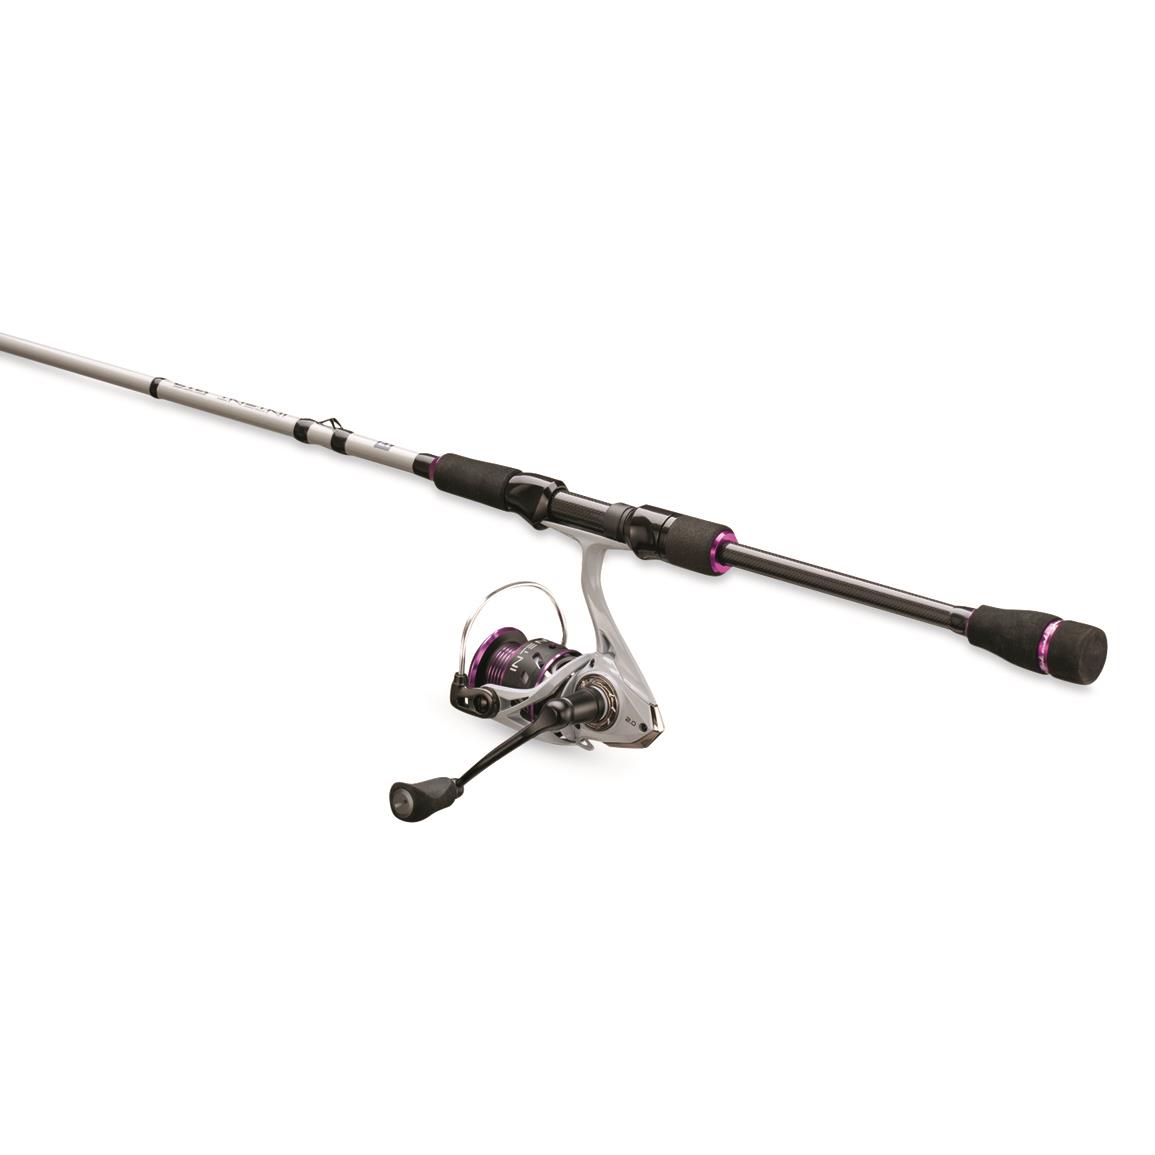 Zebco Crappie Fighter Spinning Reel and Fishing Rod Combo, 2-Piece